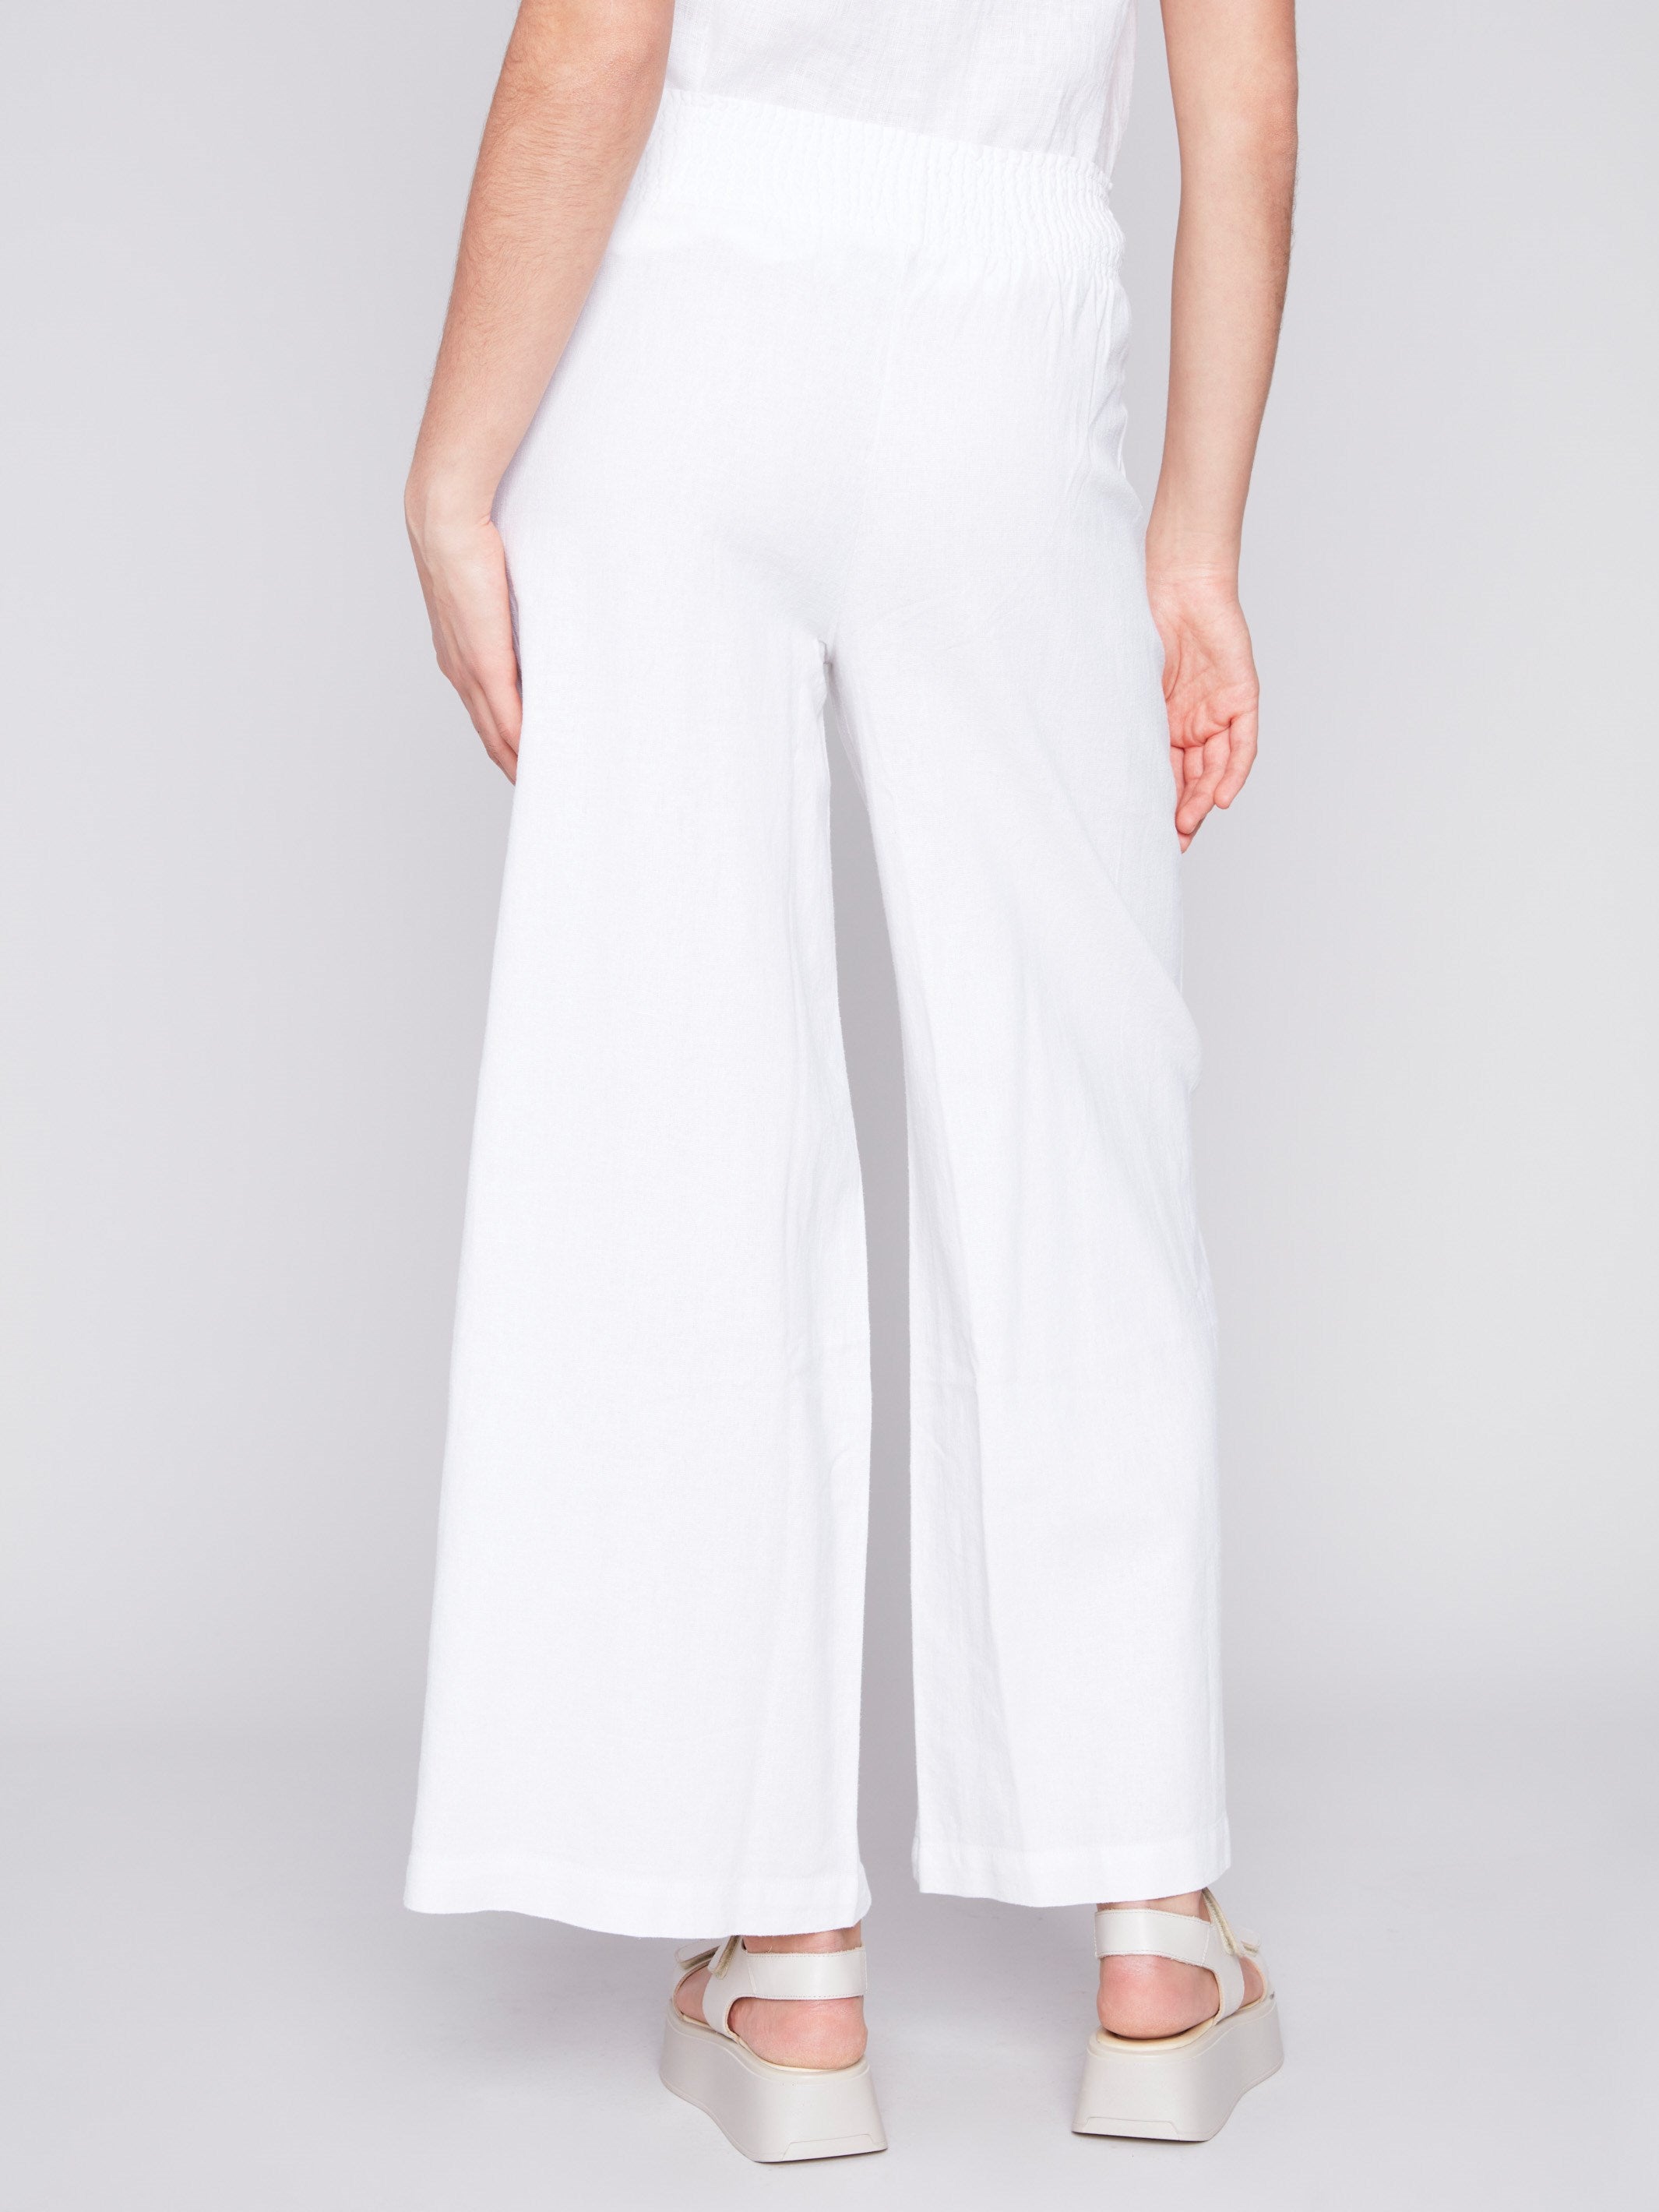 Elastic Waist Linen-Blend Pull-On Pants - White - Charlie B Collection Canada - Image 3